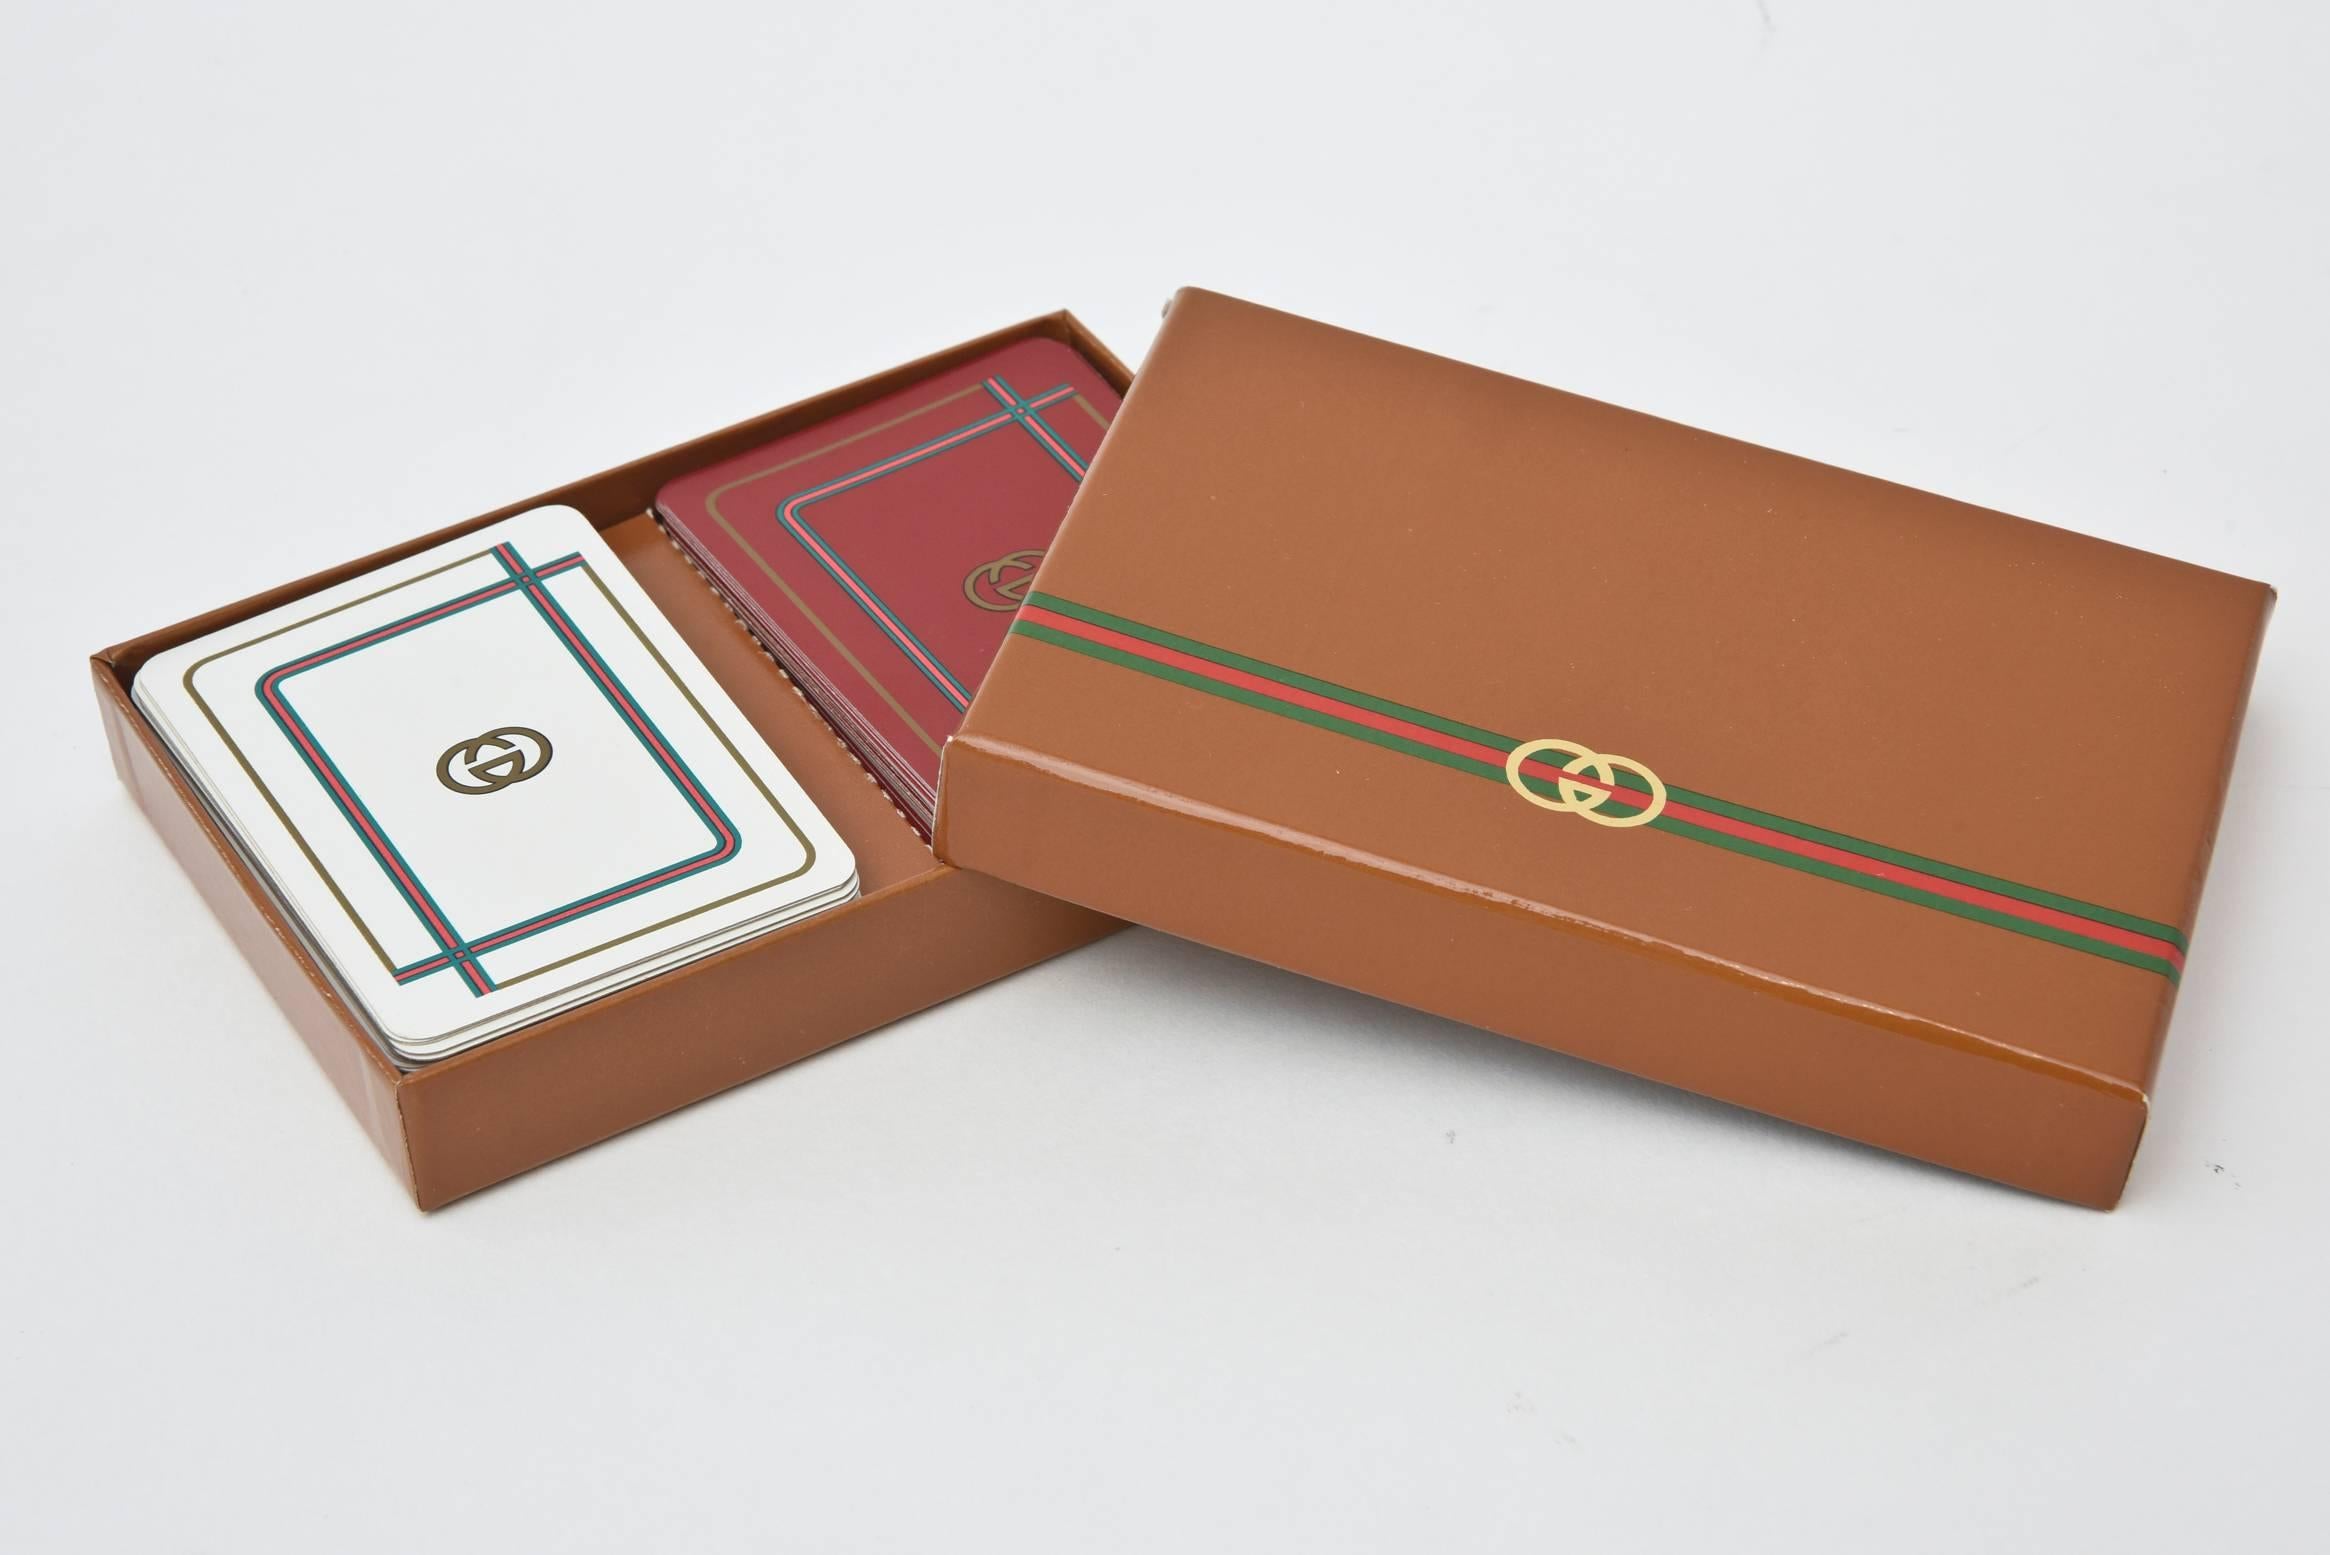 These vintage fun Gucci playing cards come in the original box.
The cards have been opened from the cellophane wrapping.
 